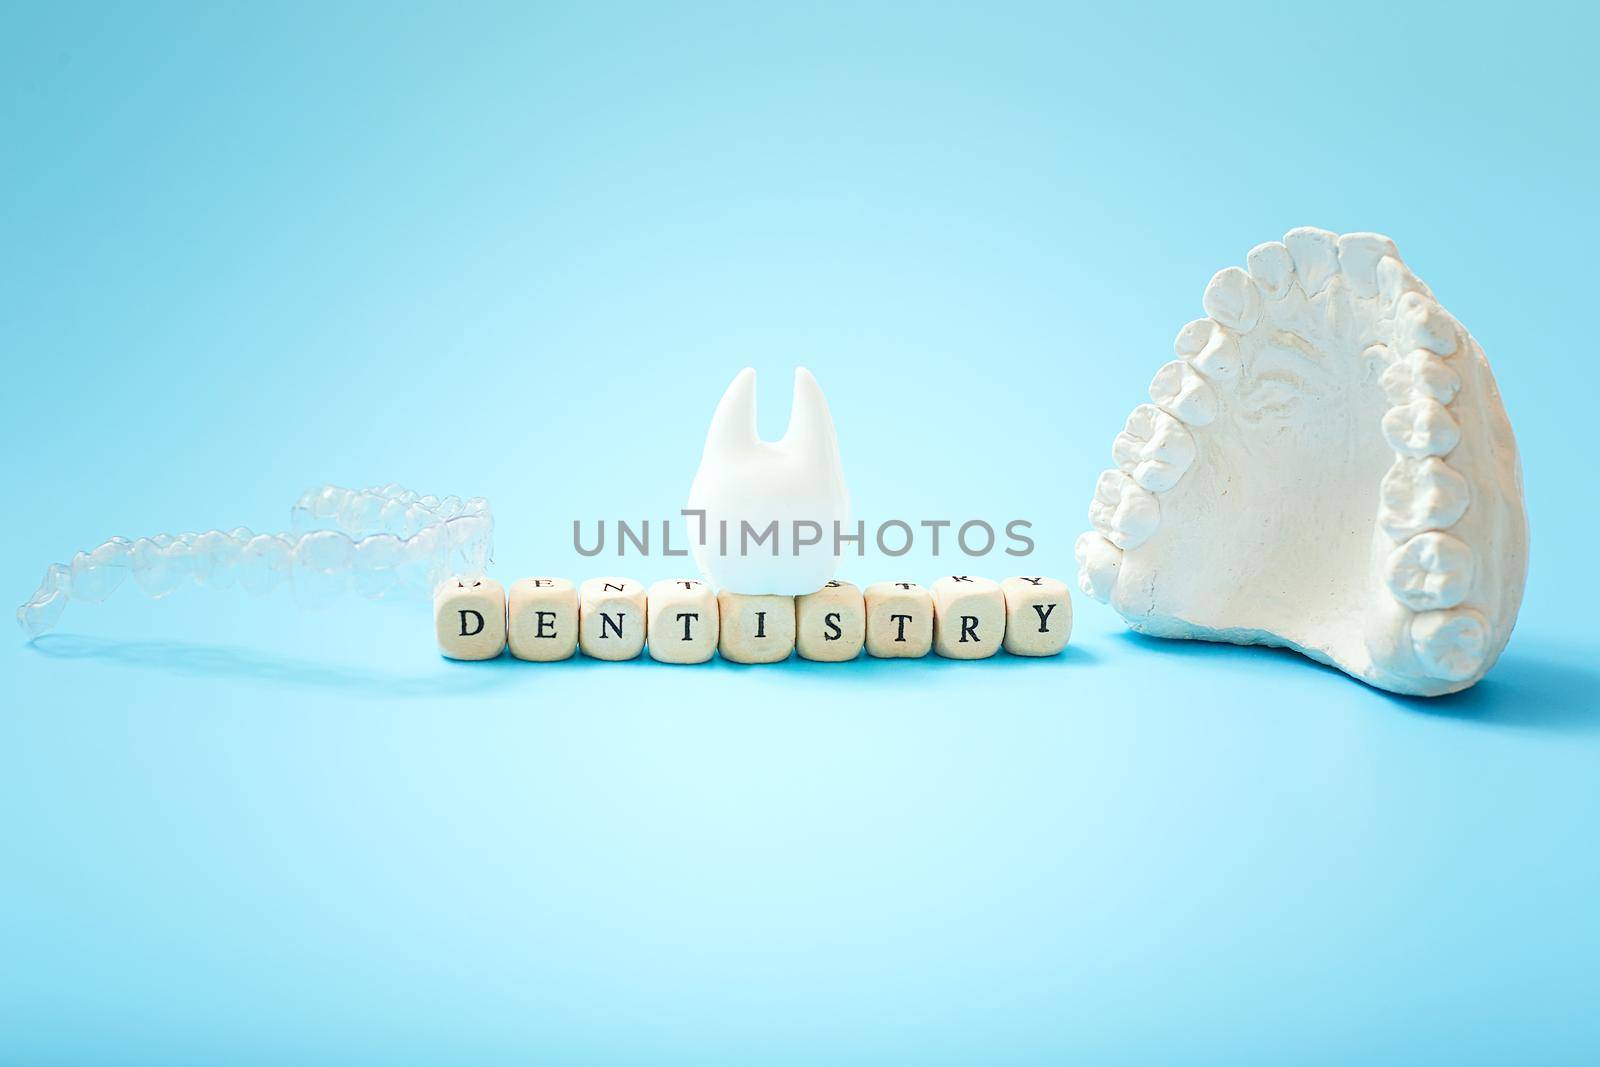 Dentist lettering for your advertisement on a blue background with invisible dental aligners or braces aplicable for an orthodontic dental treatment